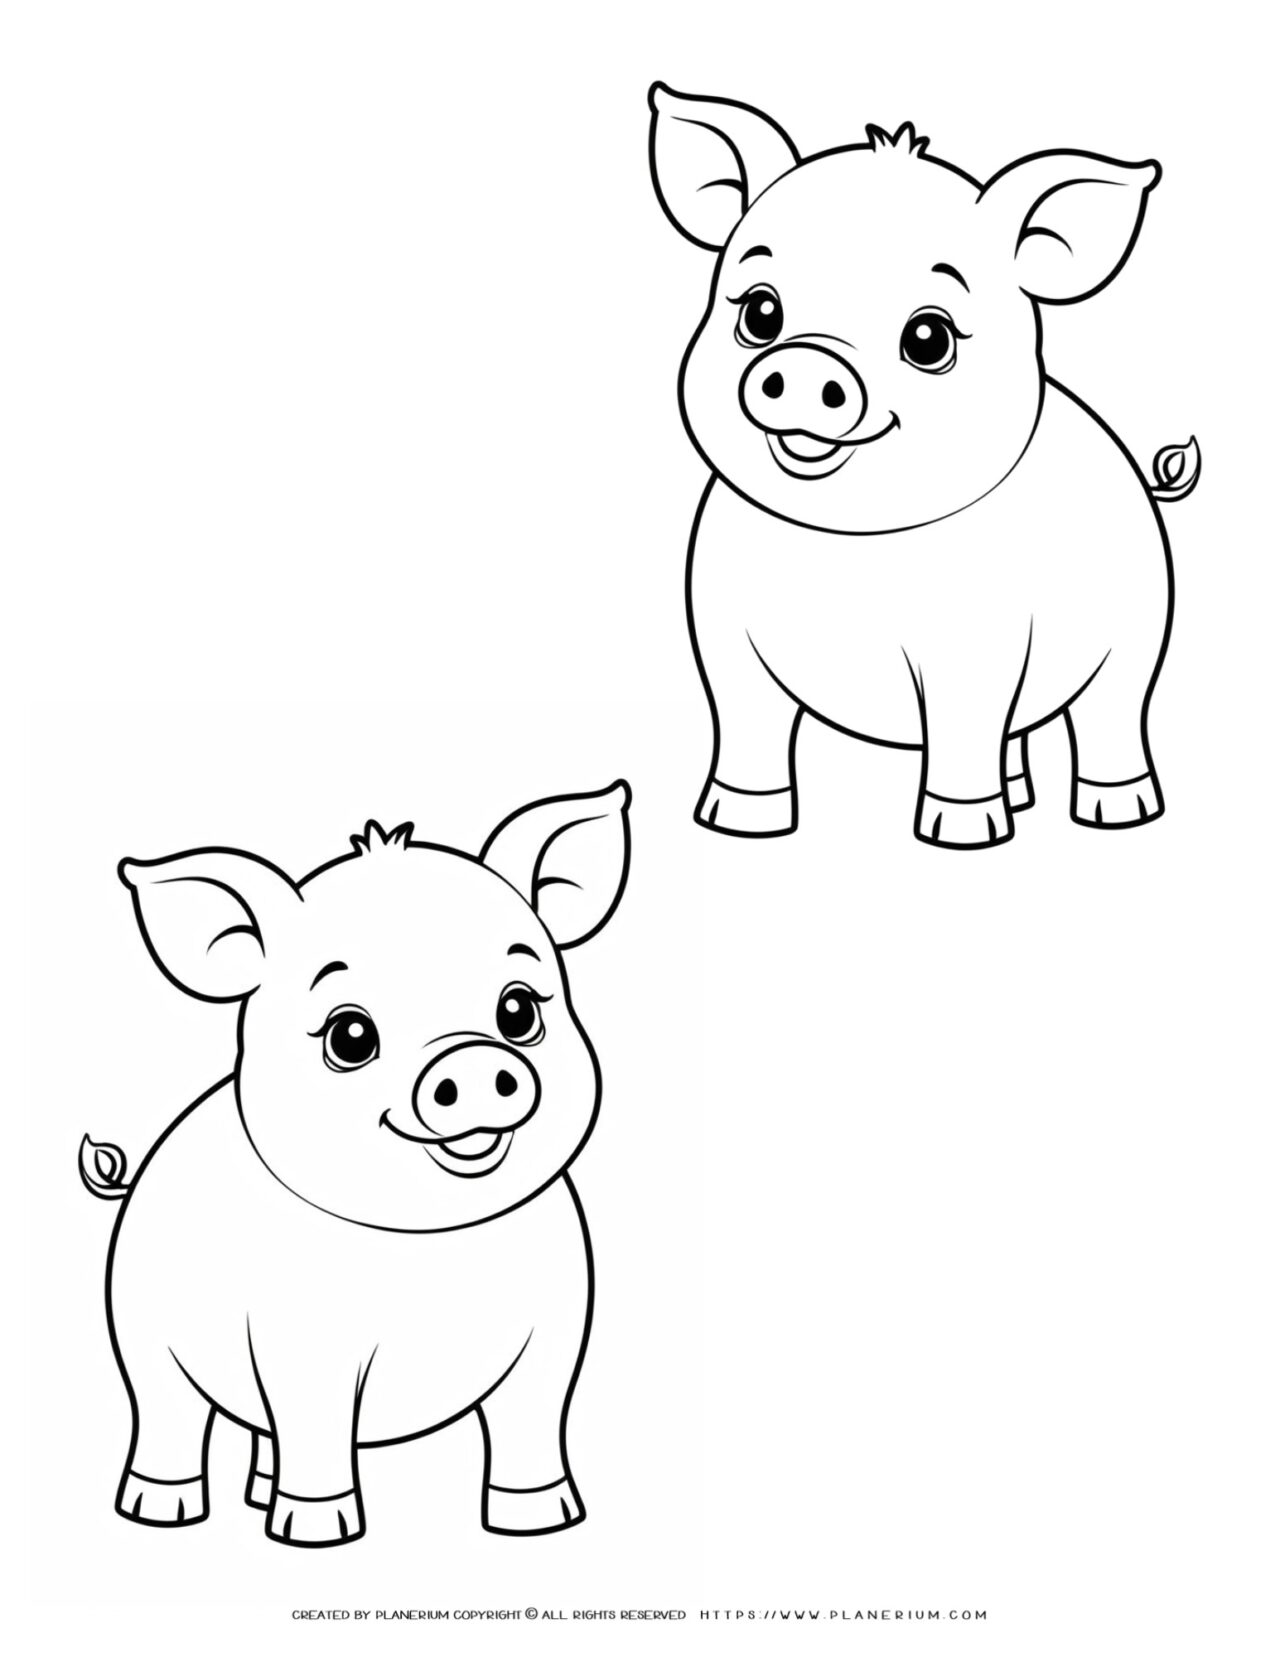 two-cute-pig-outlines-template